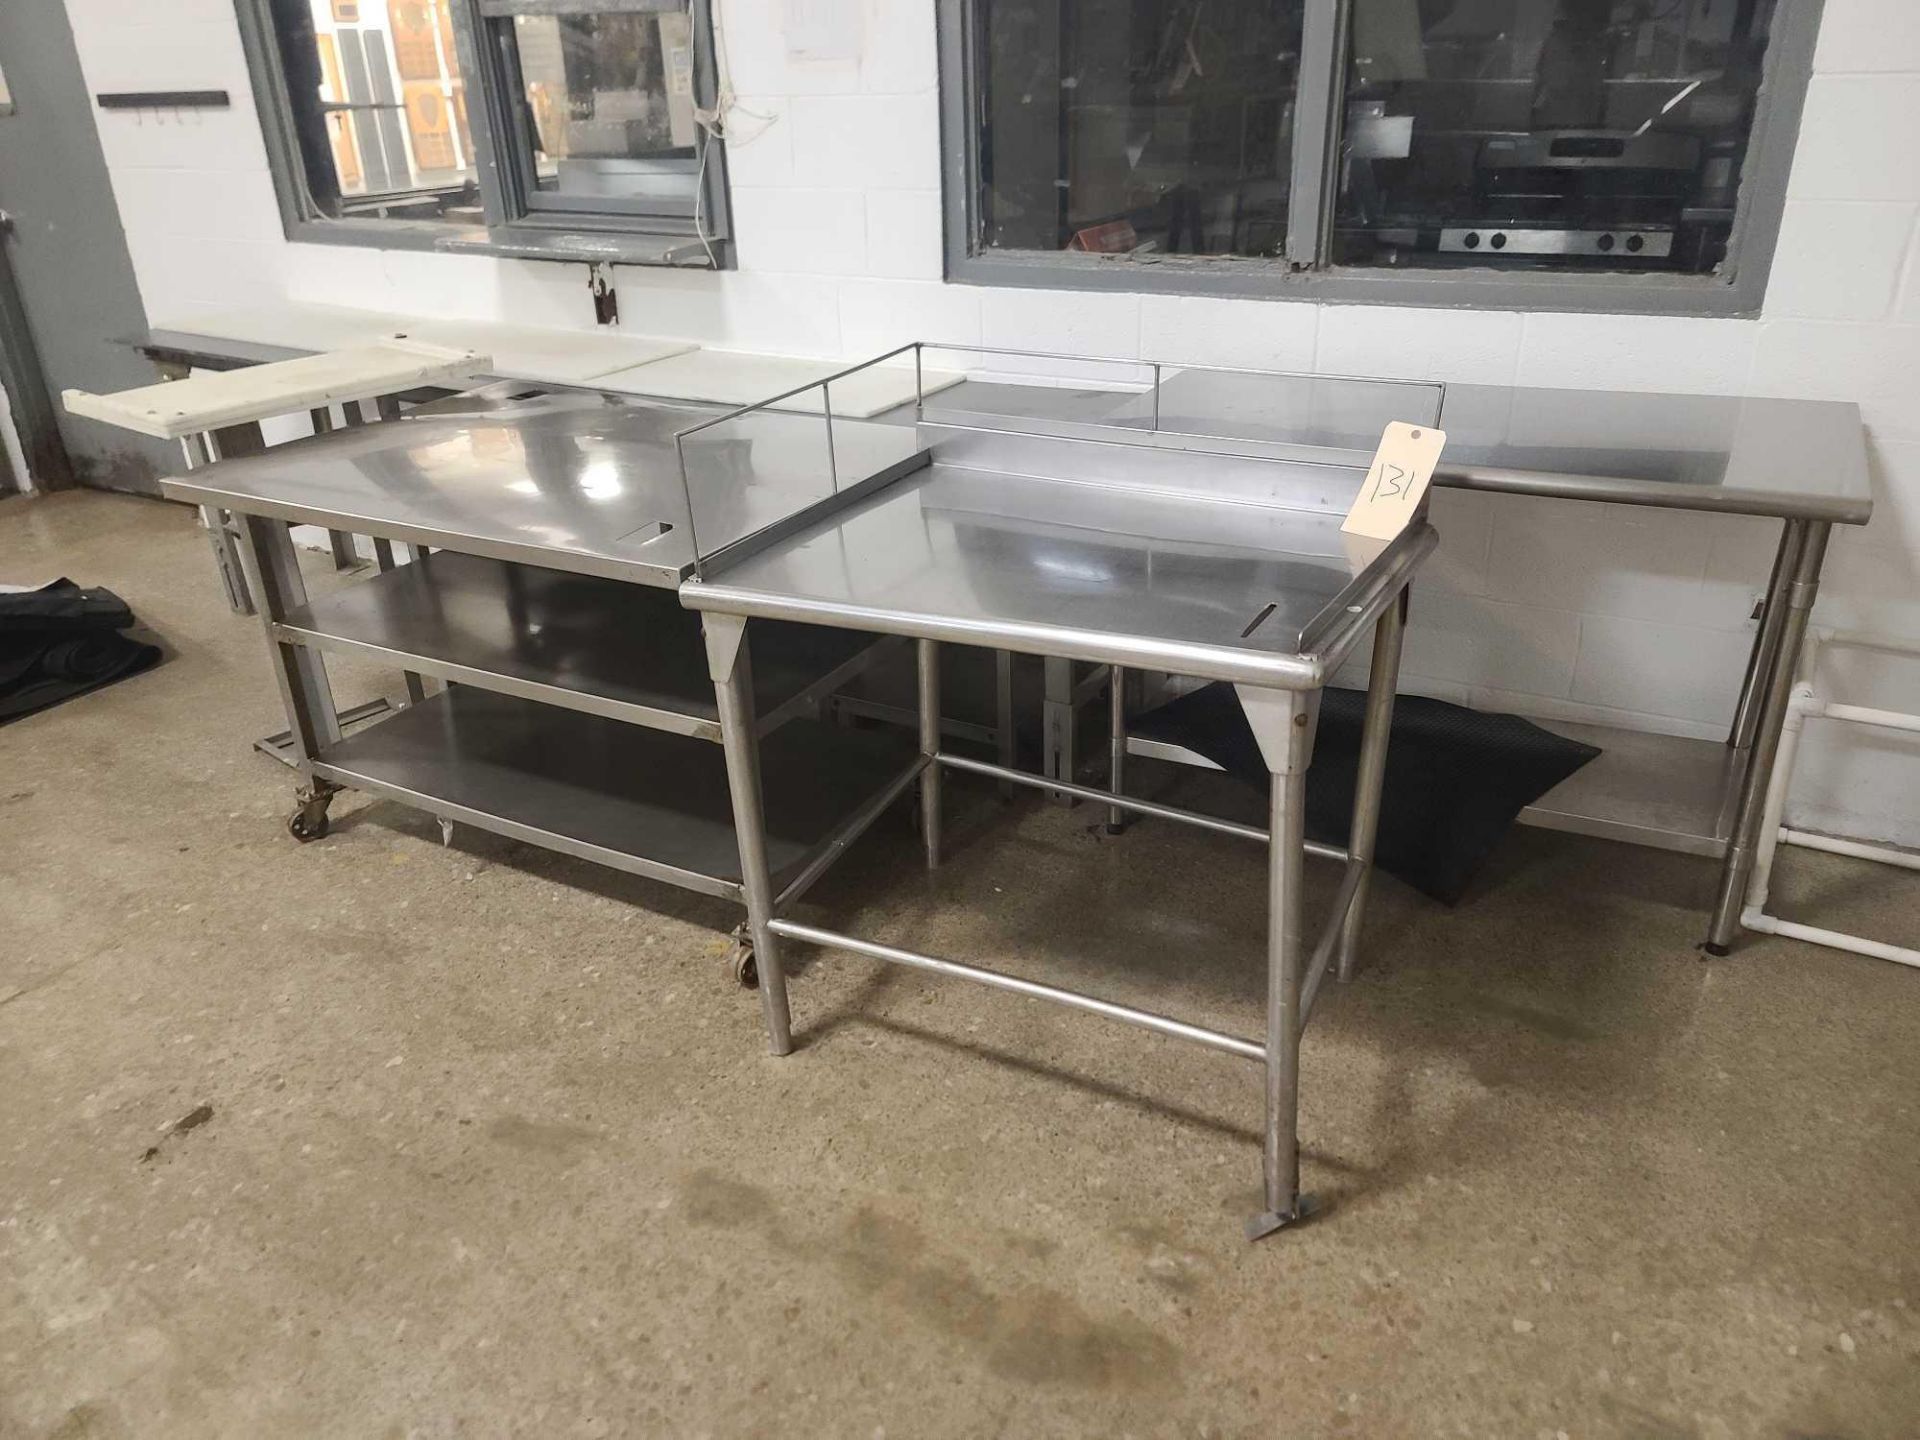 Five Stainless Steel Tables